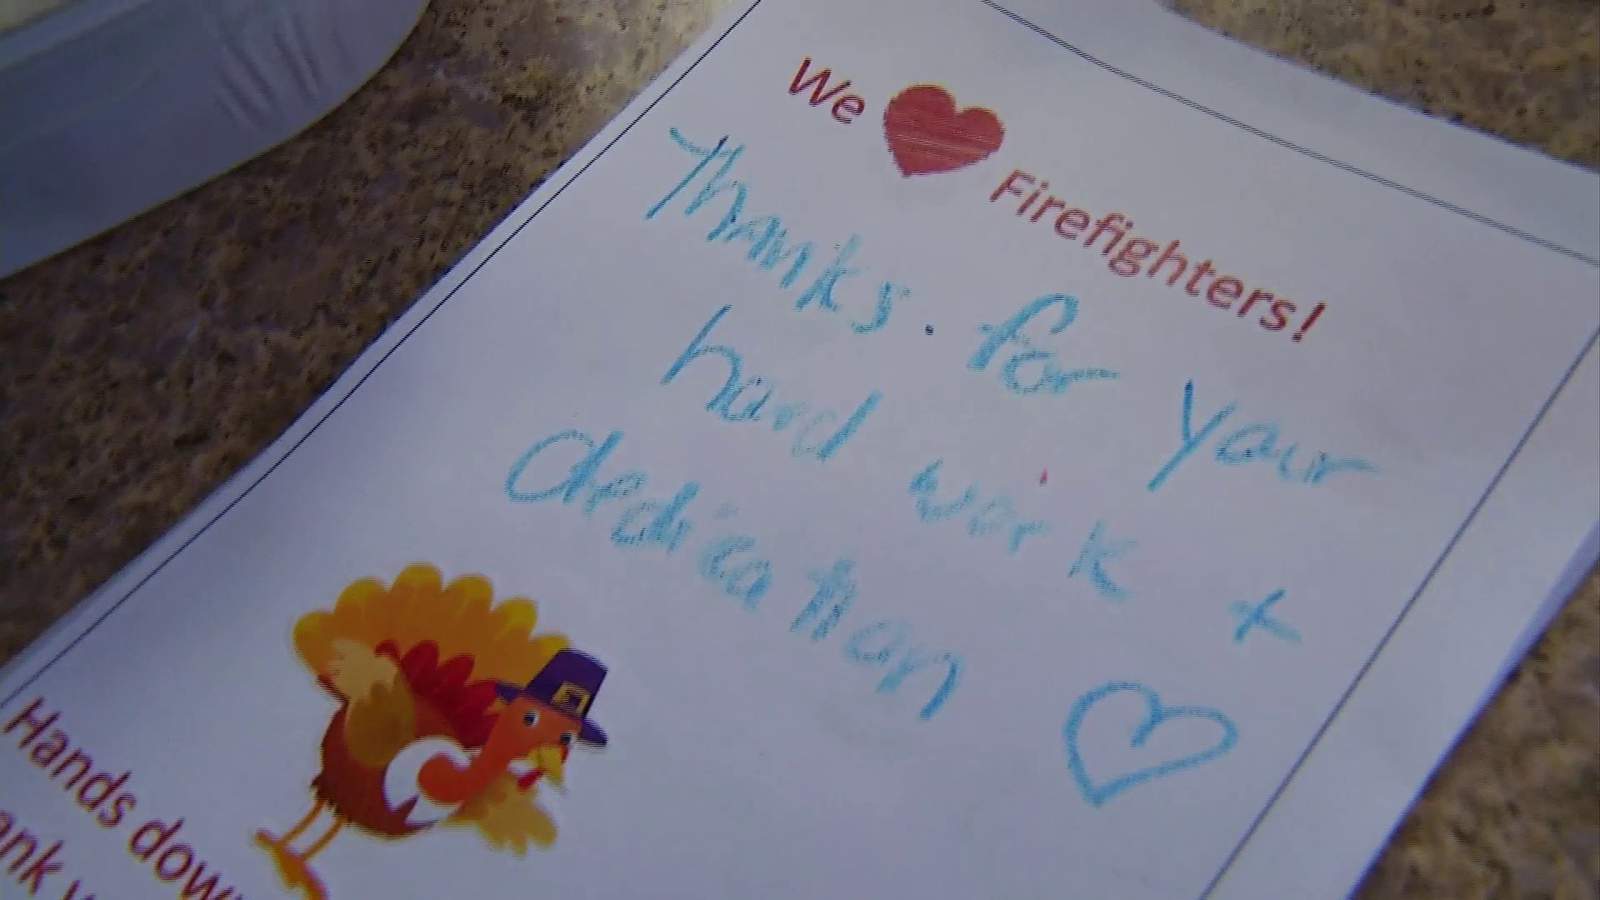 Firefighters at Roanoke’s Fire Station 2 spend Thanksgiving on the job